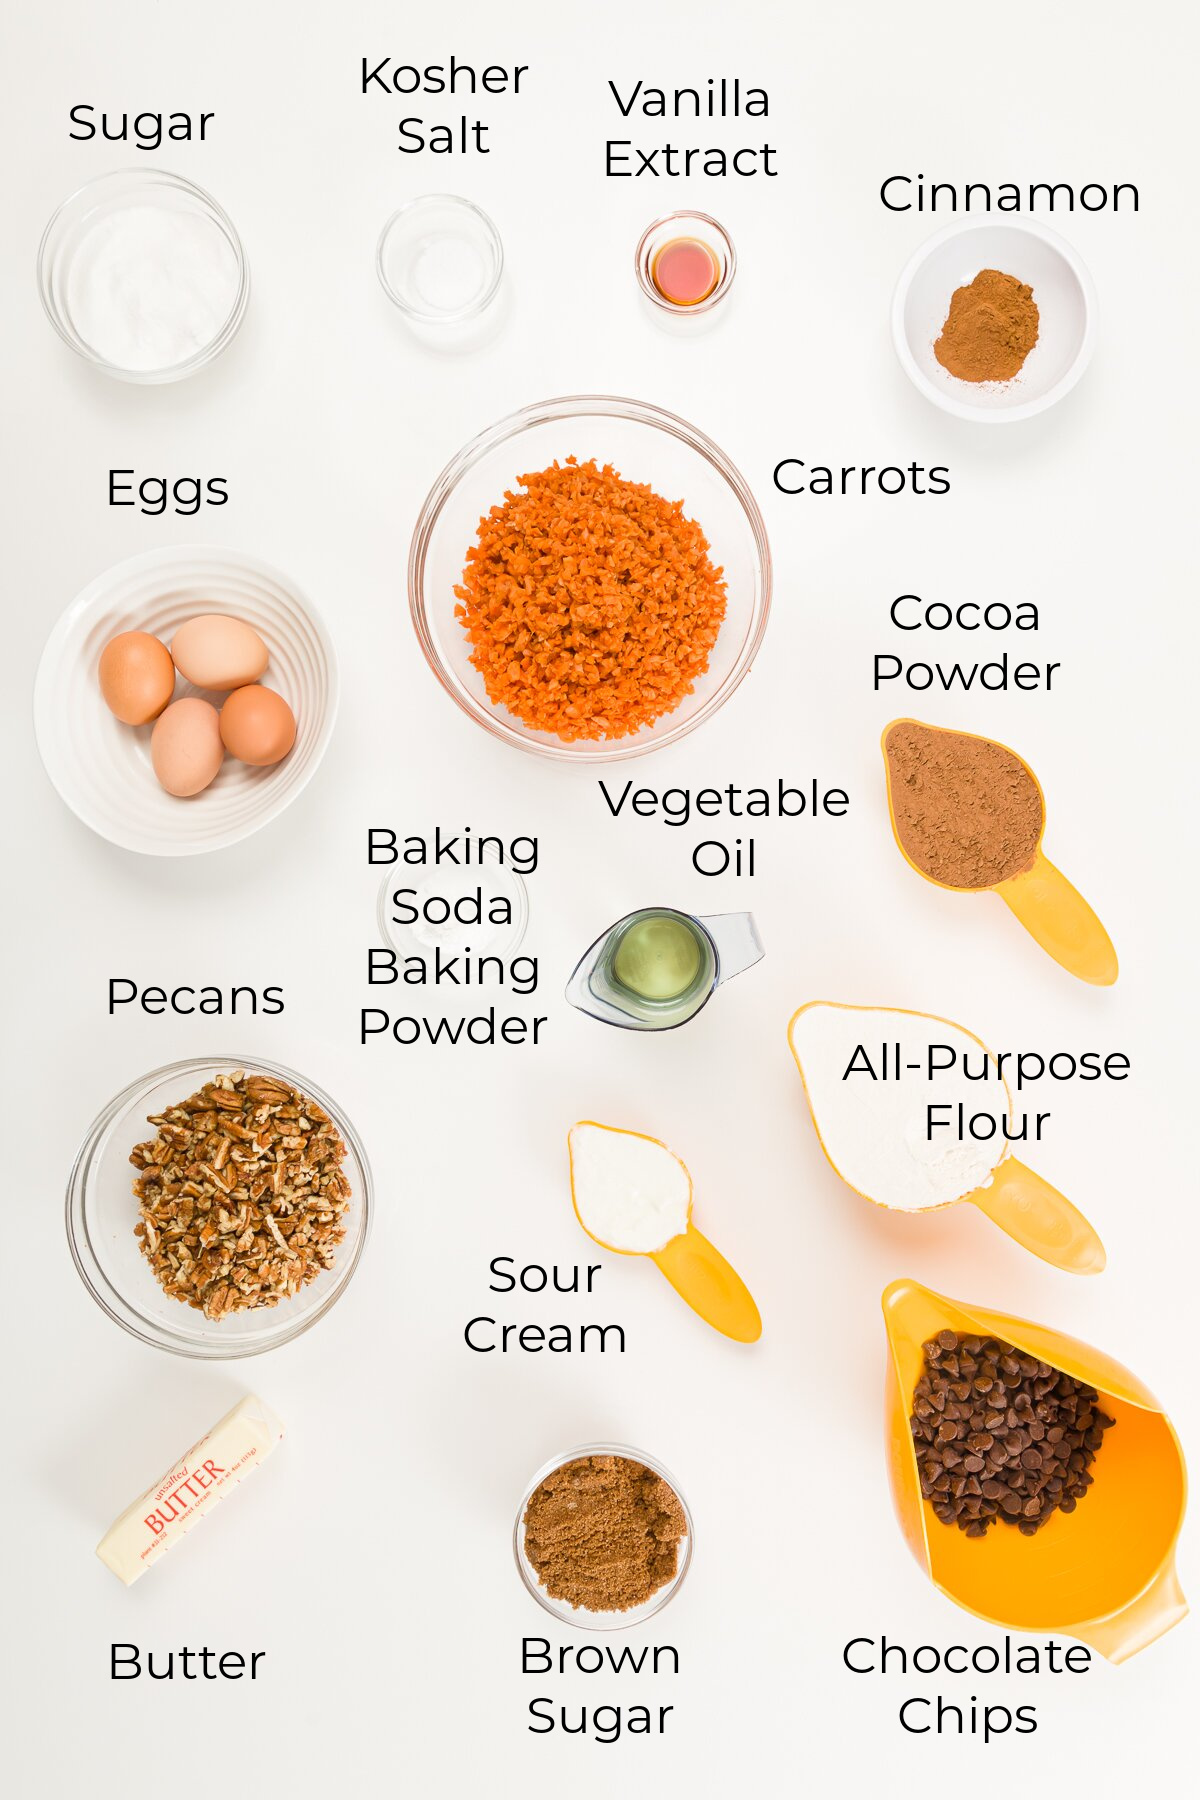 Top down view of chocolate carrot cake ingredients